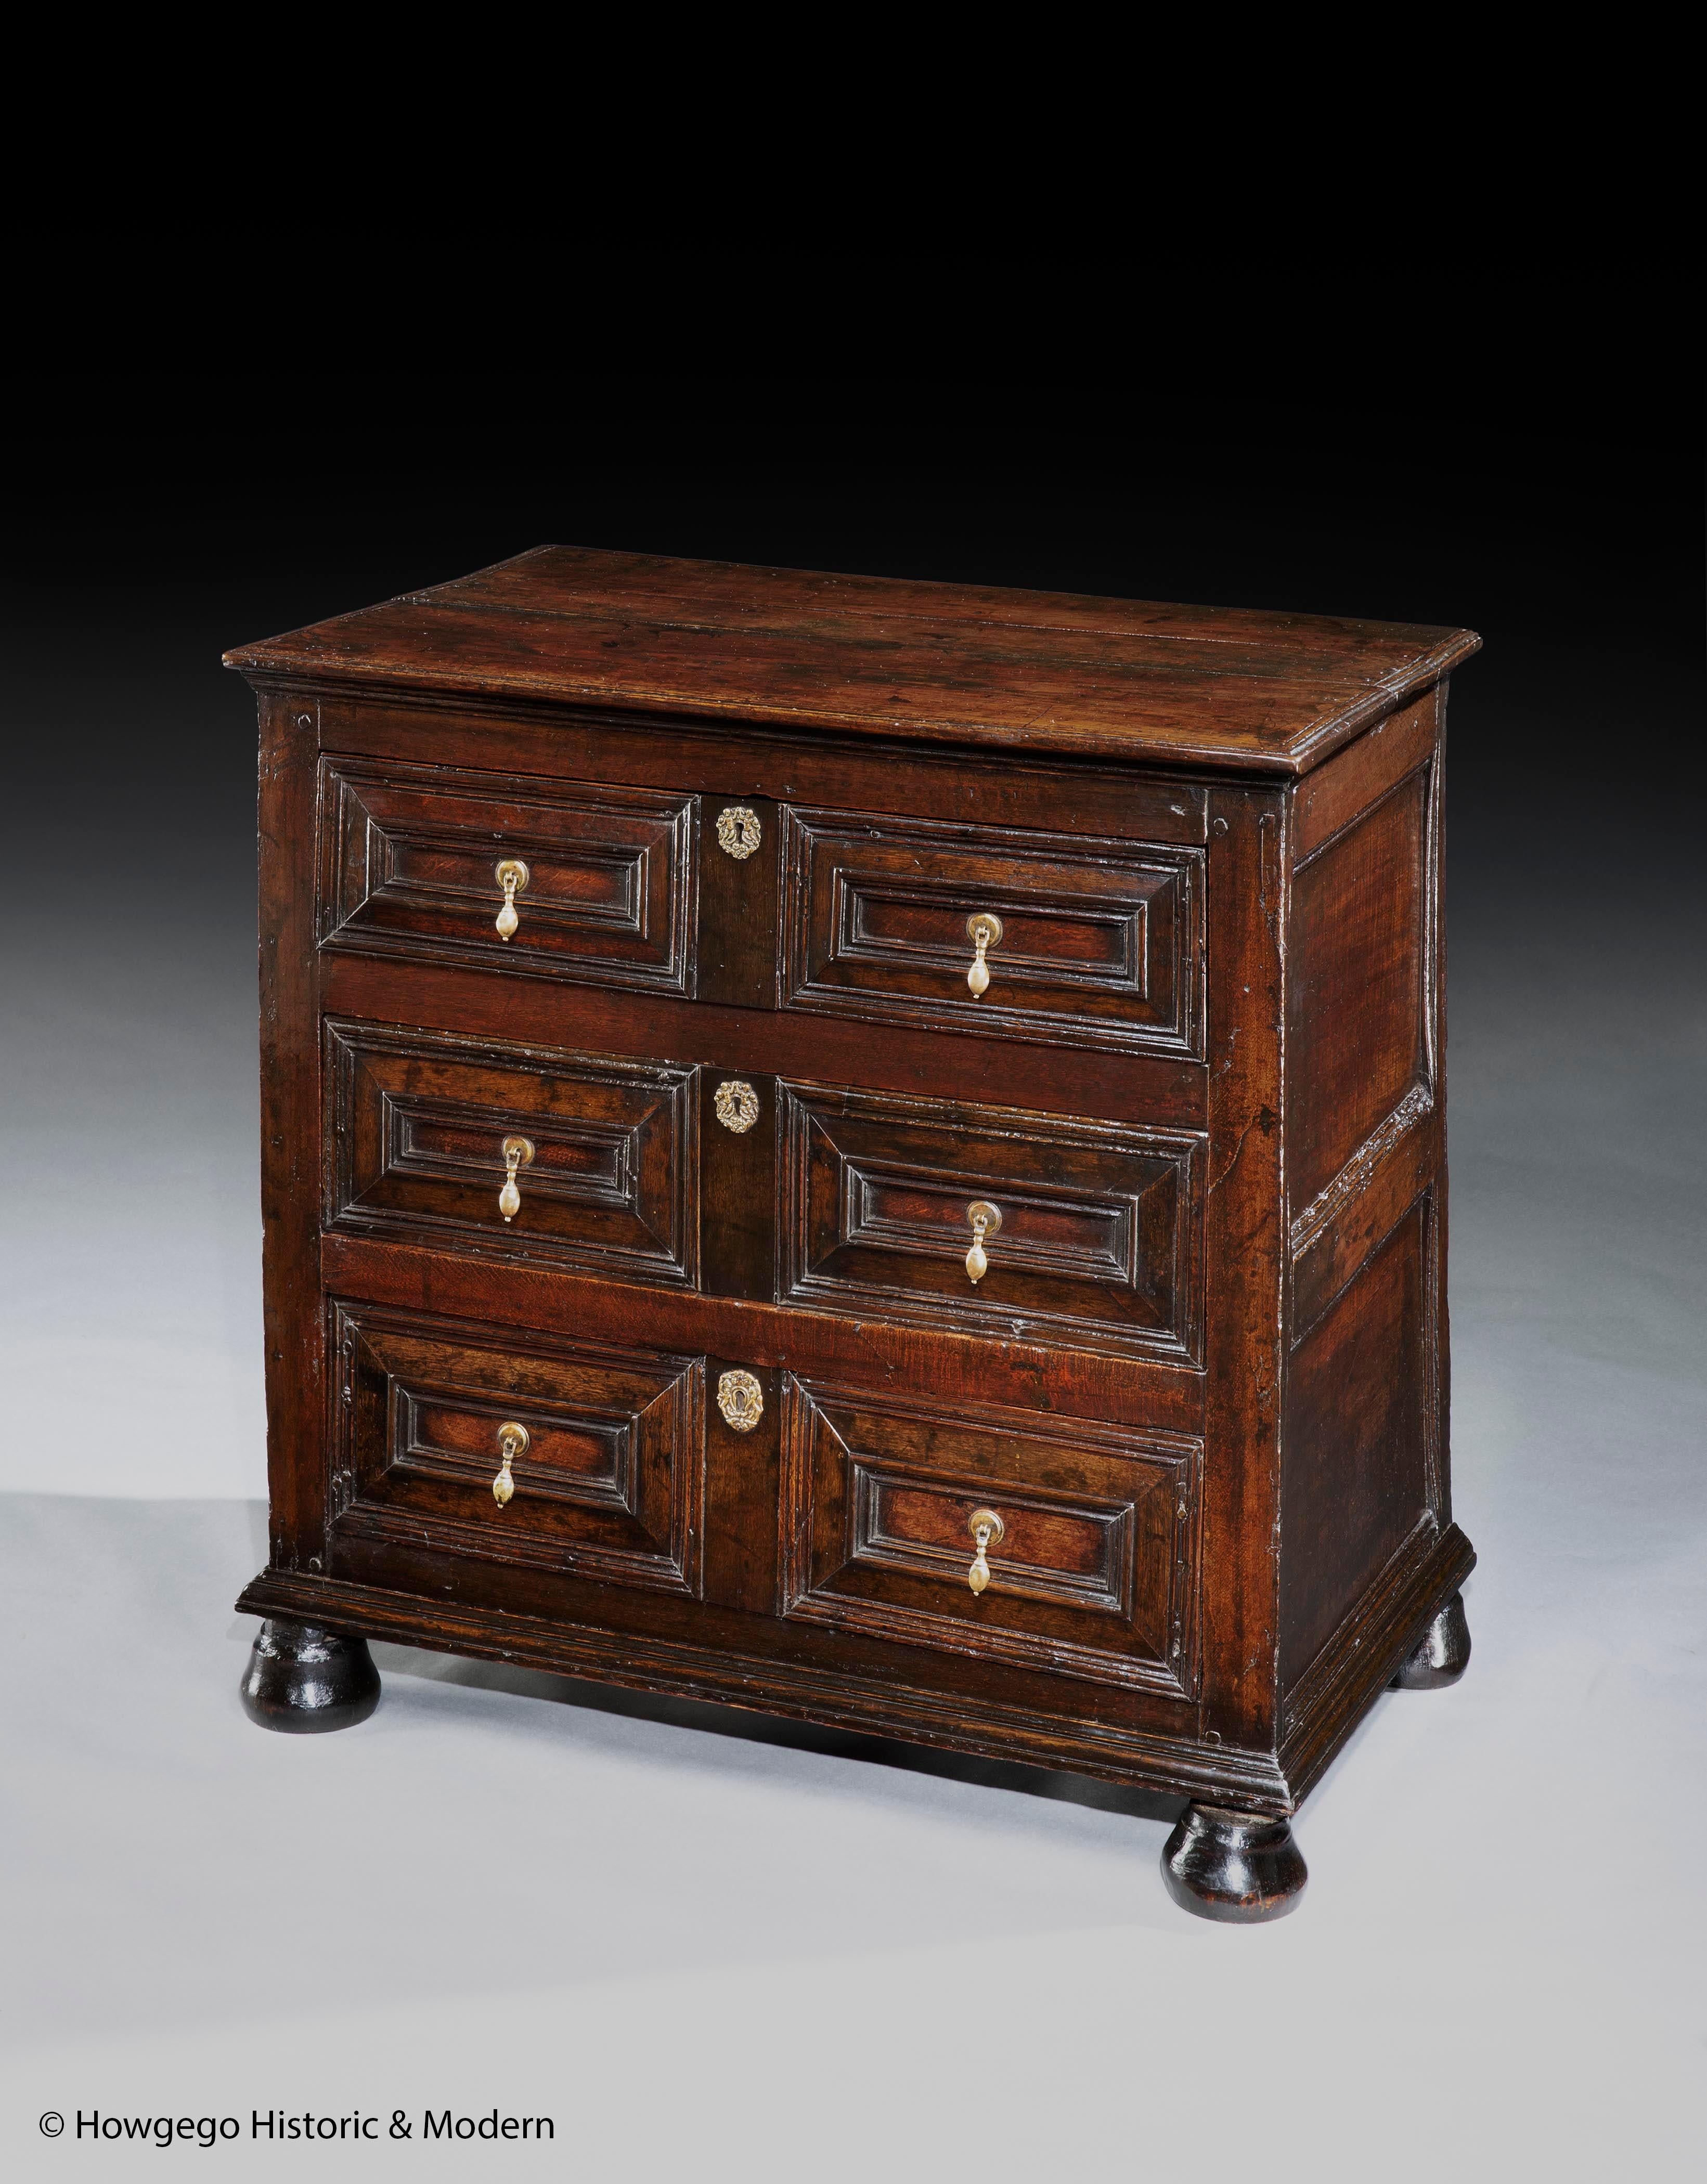 Lovely, characterful example of a good late-17th century oak chest of drawers with an exceptional lustrous and rich colour and patina.
The cushion moulded drawer fronts elevate this chest which has characteristic panelled sides, brasses and bun